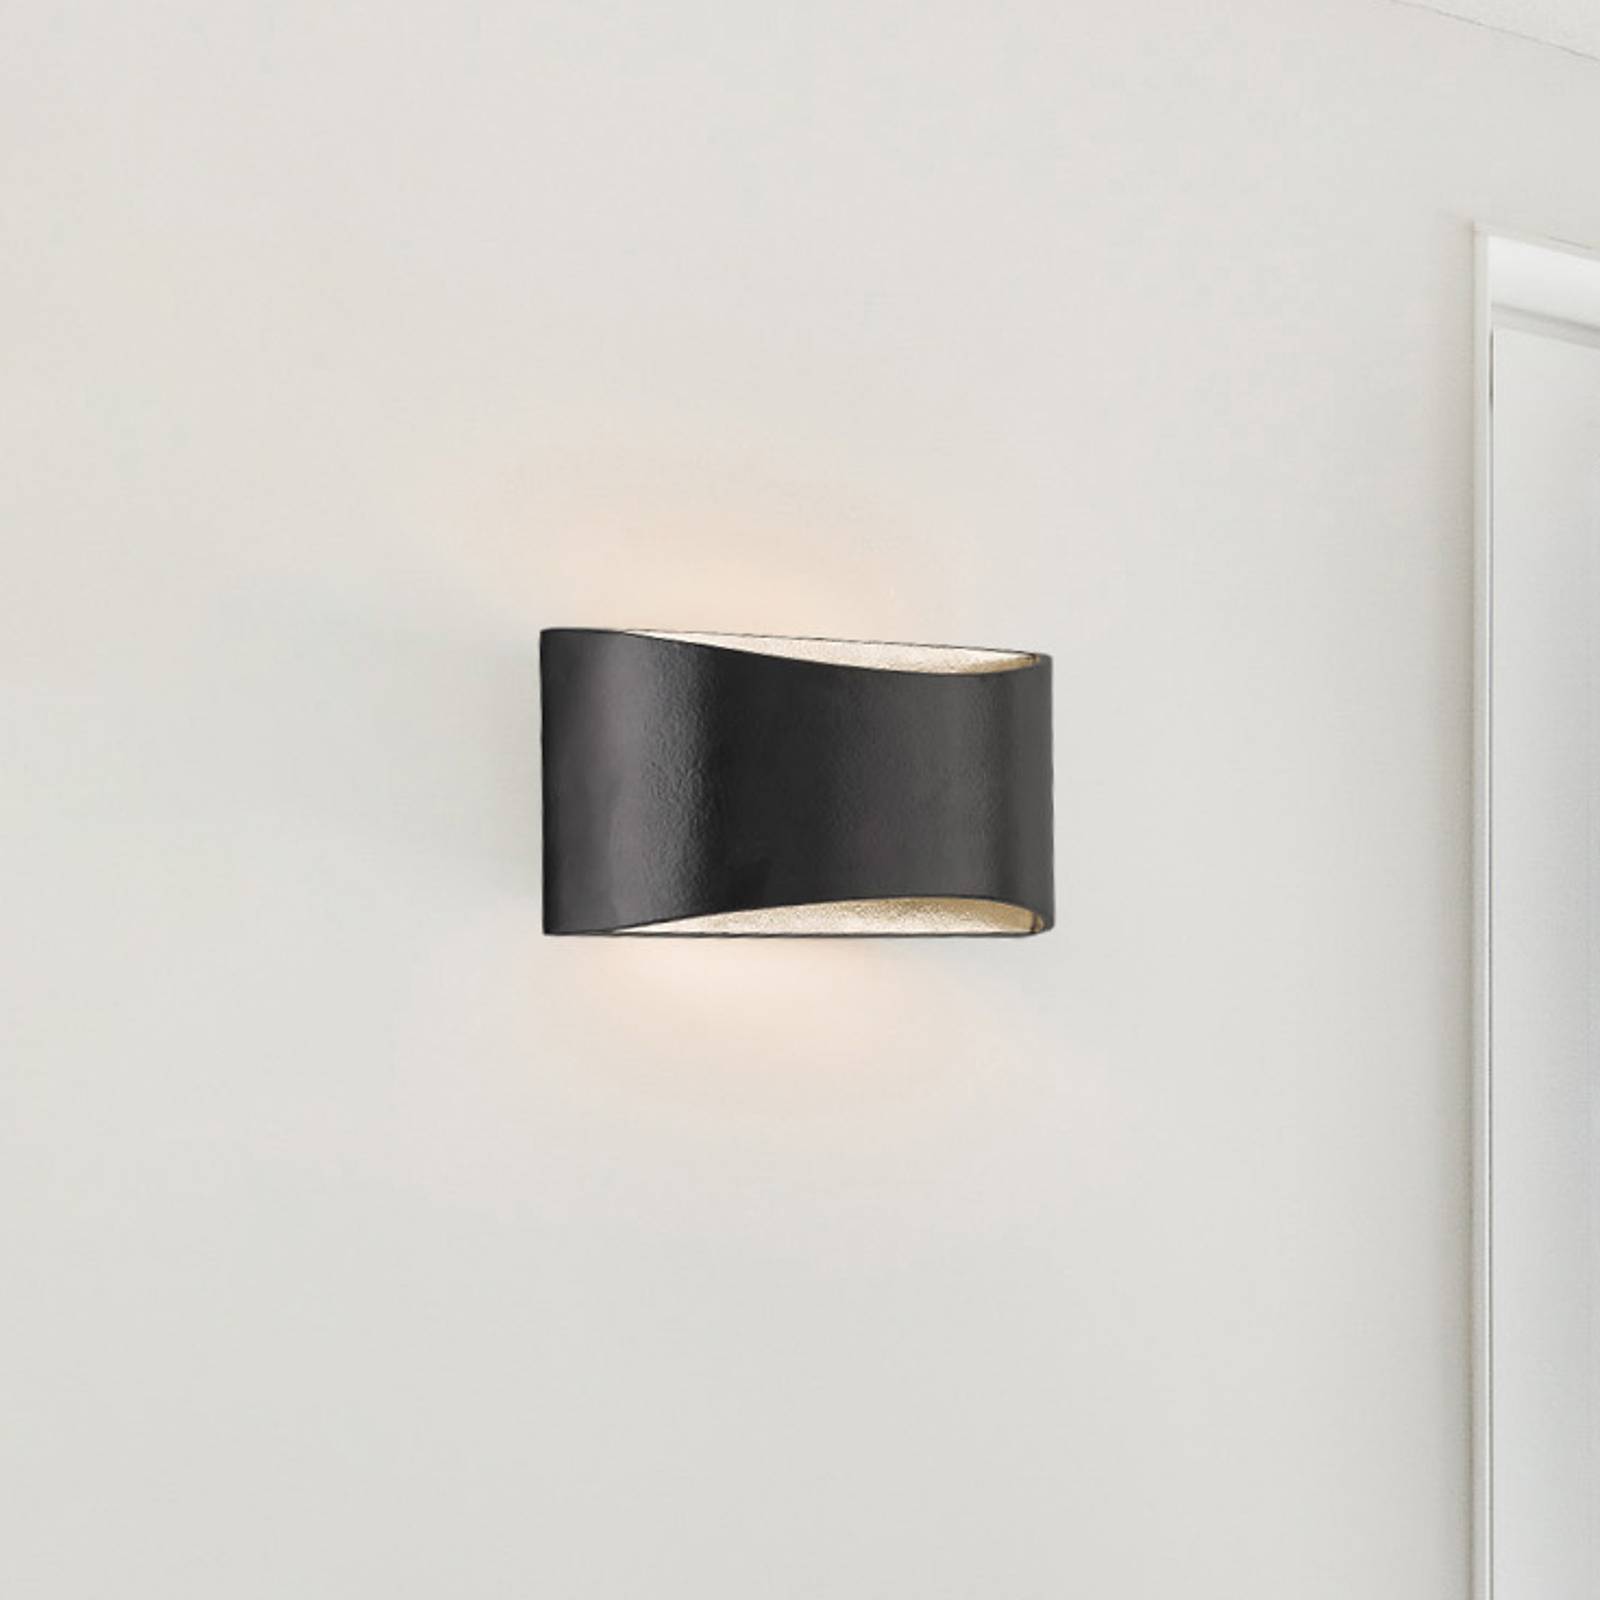 Image of FISCHER & HONSEL Applique LED Arles, dimming, nero